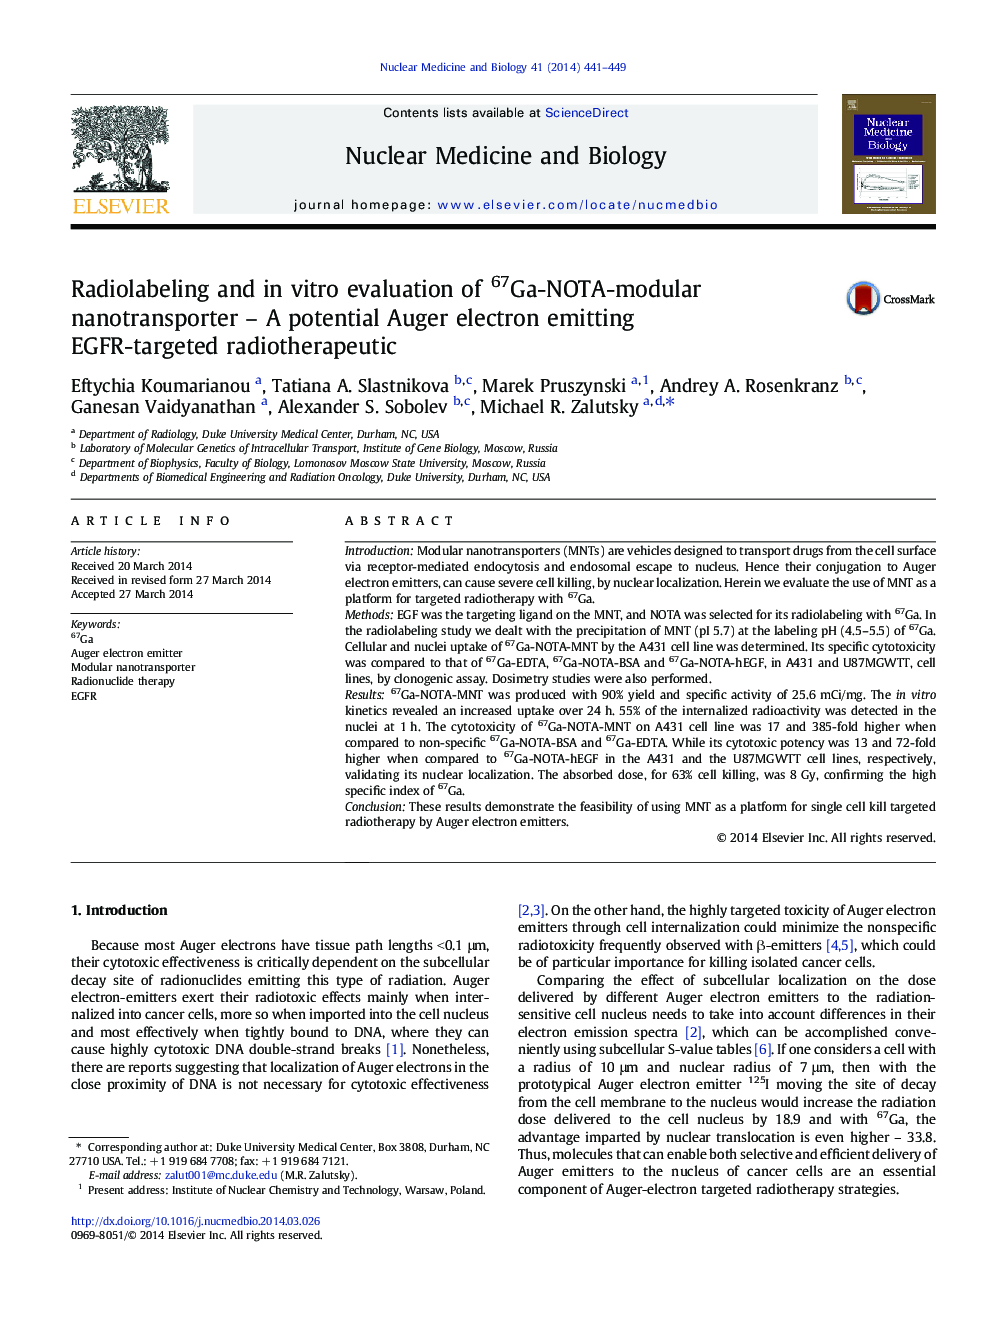 Radiolabeling and in vitro evaluation of 67Ga-NOTA-modular nanotransporter – A potential Auger electron emitting EGFR-targeted radiotherapeutic